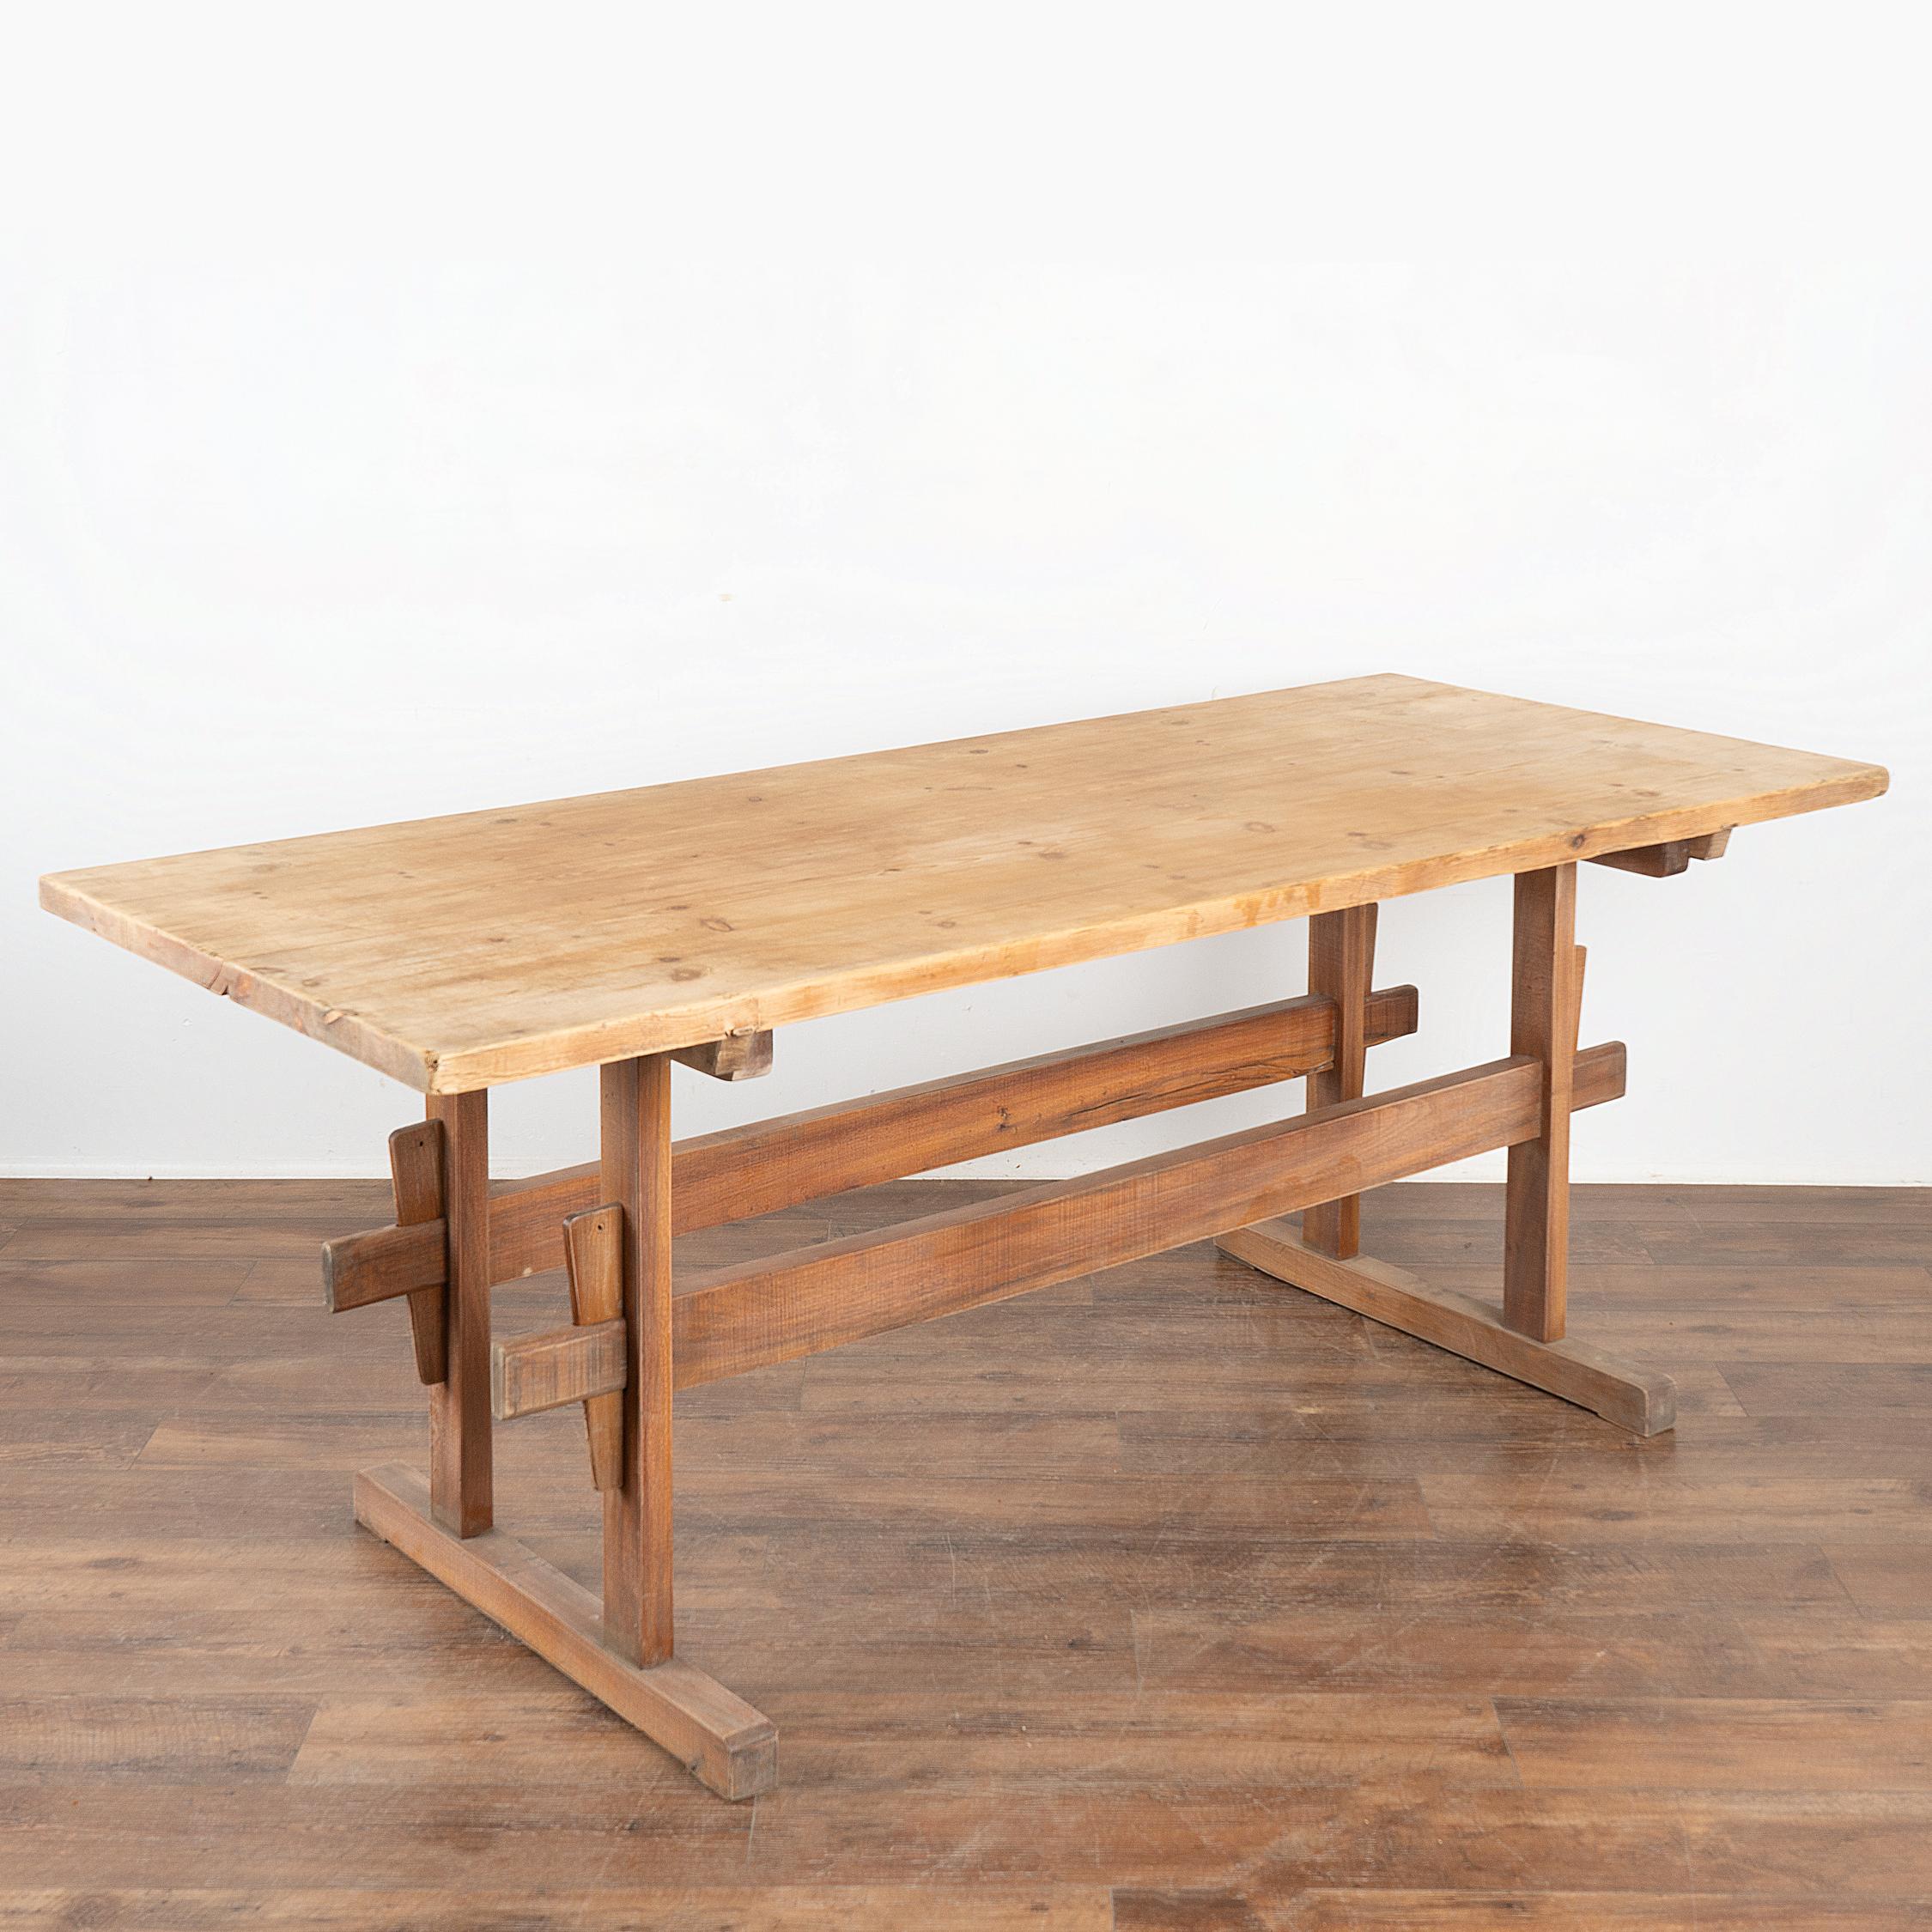 It is the double stretcher and wide platform feet of the base that give this wonderful pine trestle table table it's country charm in addition to strength and stability.
The top reveals old scratches, gouges, stains, nicks, etc. which all add to the